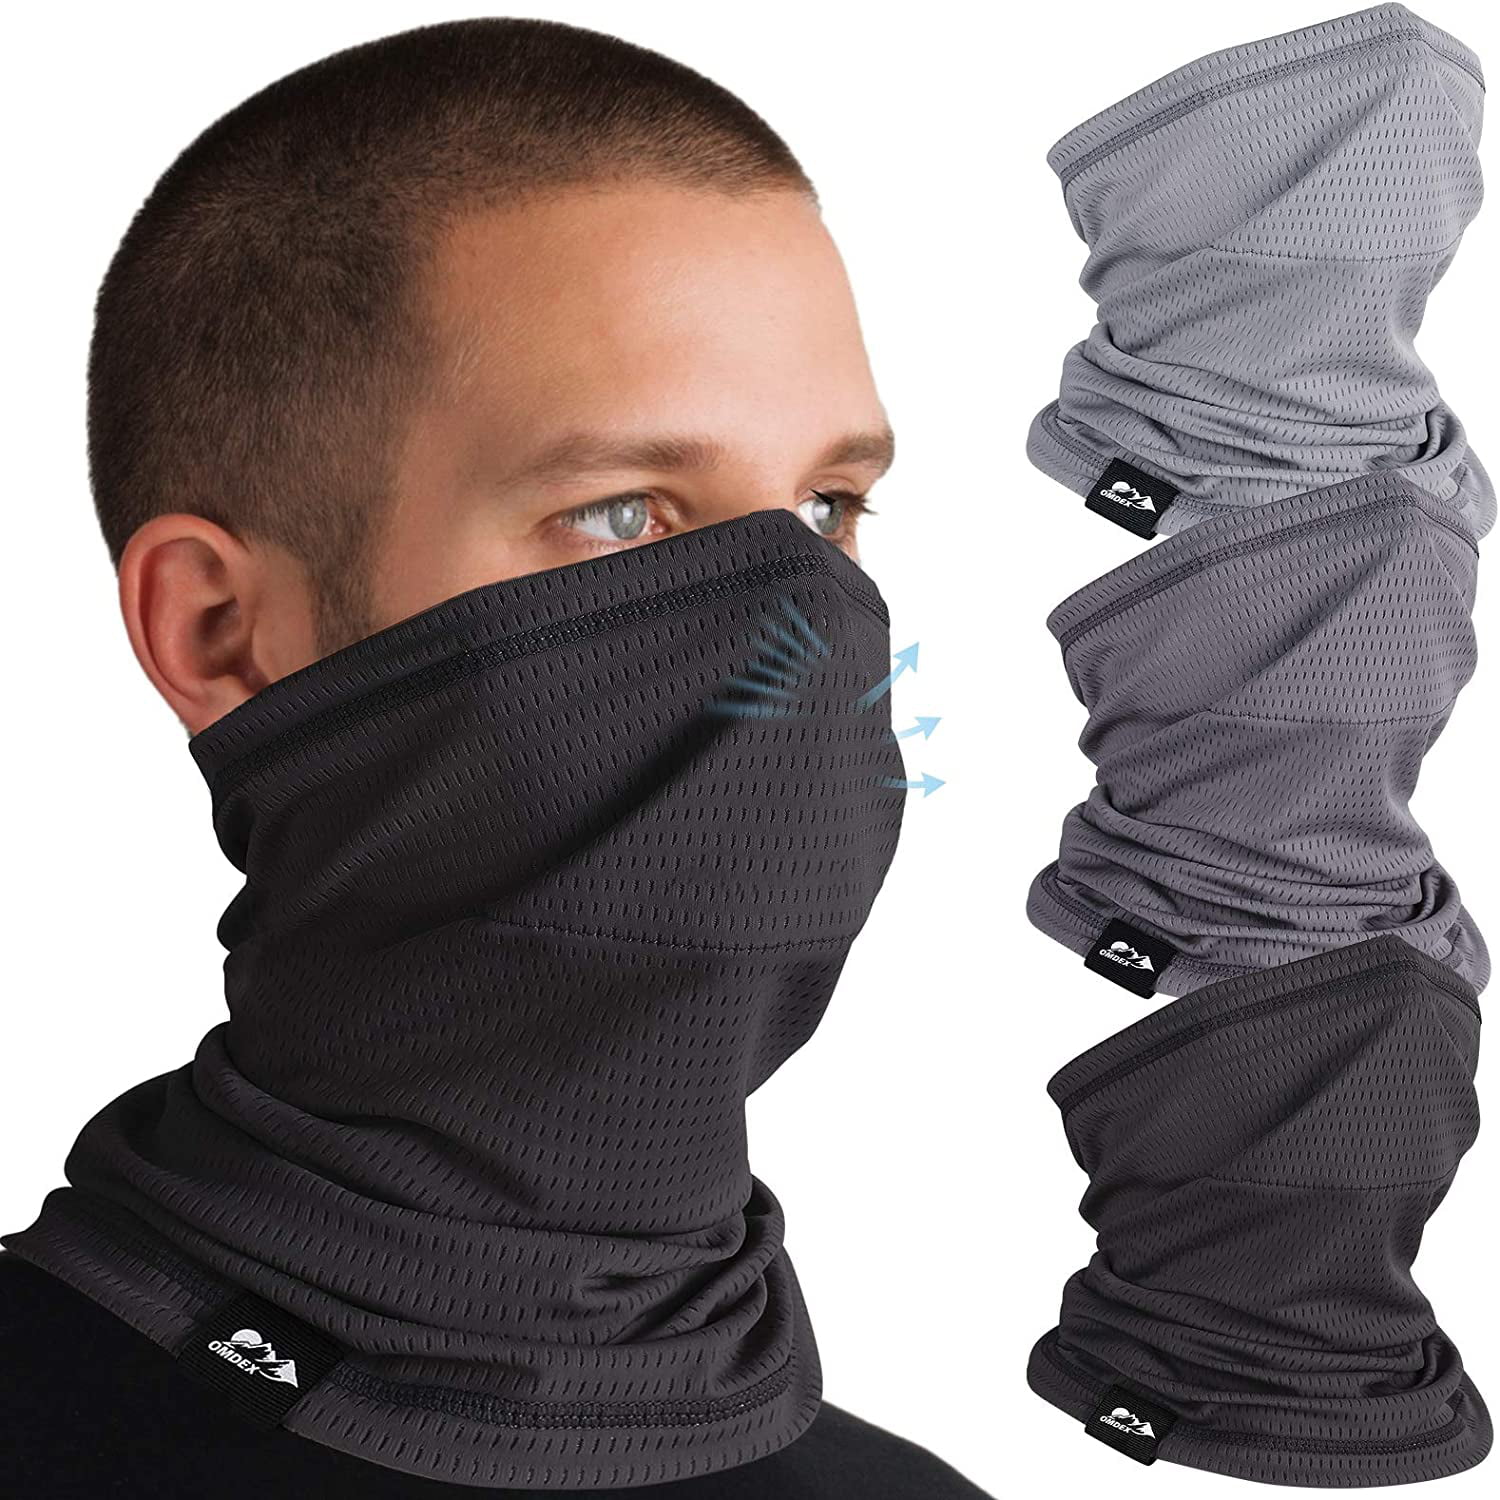 Neck Warmer Gaiter 2 Pack Winter Fleece Scarf Elastic Neck Gaiter Windproof Face Cover Breathable Balaclava Soft Tube Scarf for Men & Women Cold Weather Motorcycles Skiing Fishing Hiking Running